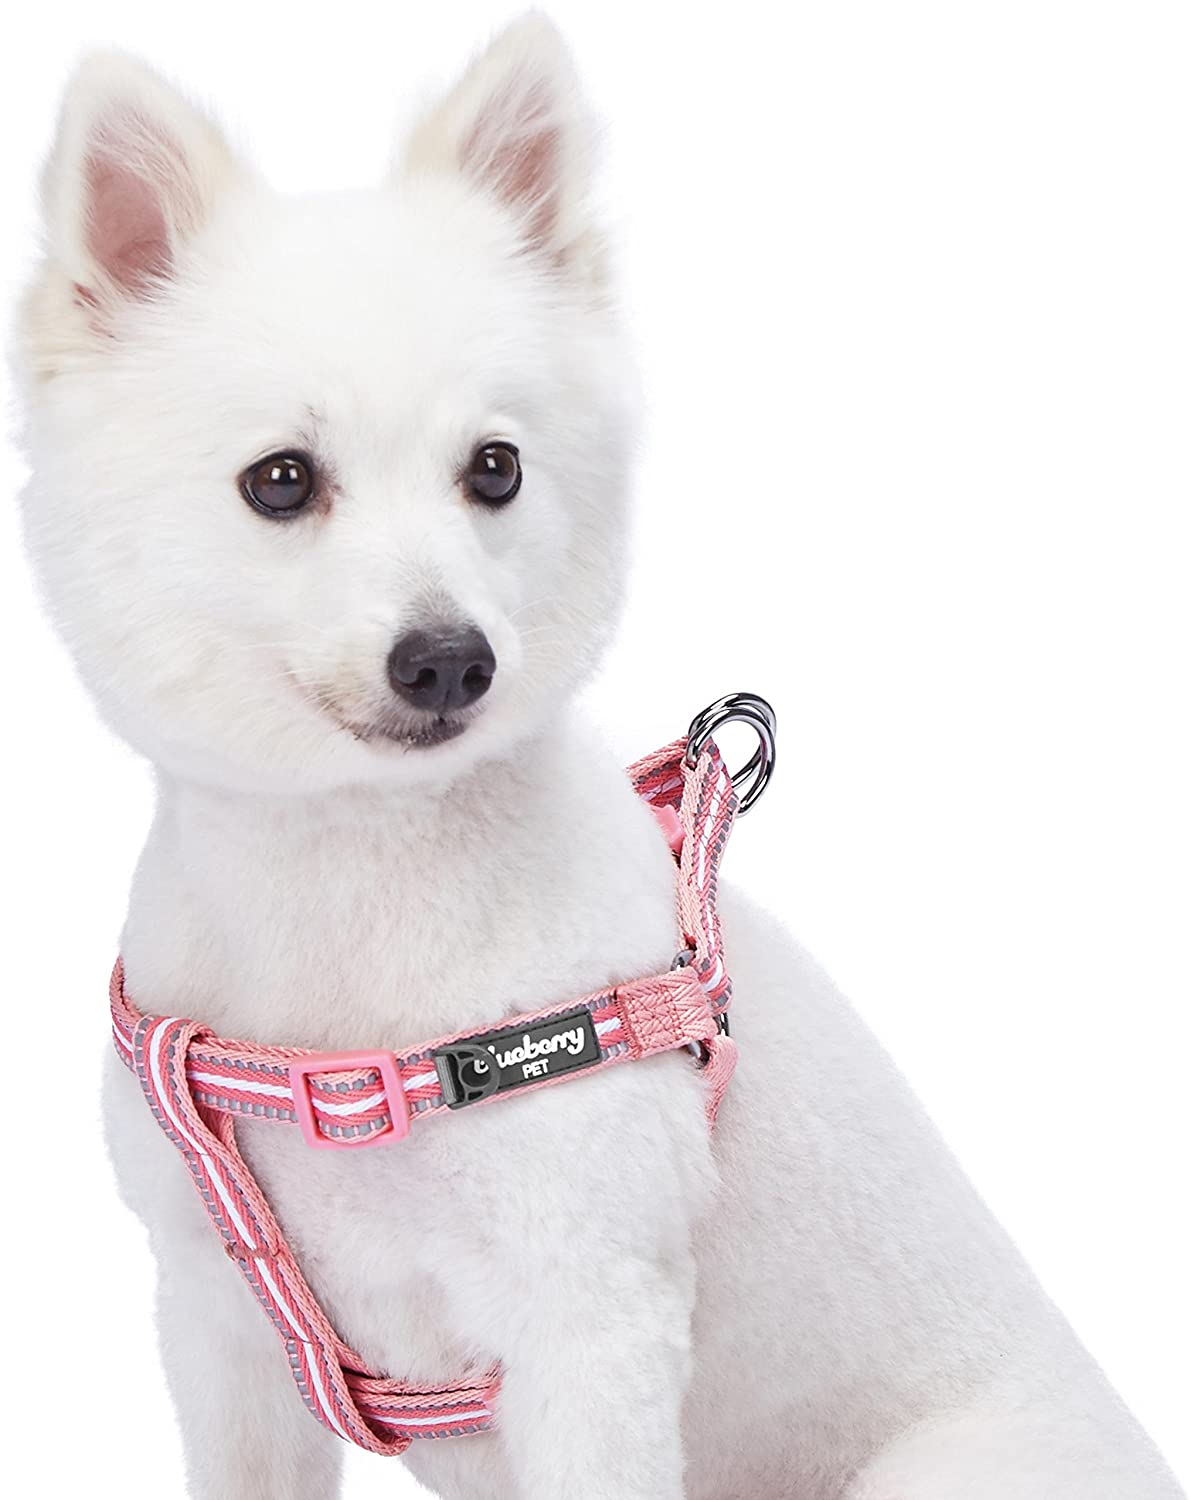 Blueberry Pet Dog Harness, Chest Girth 16.5" - 21.5", Small, Adjustable Harnesses for Dogs - e4cents